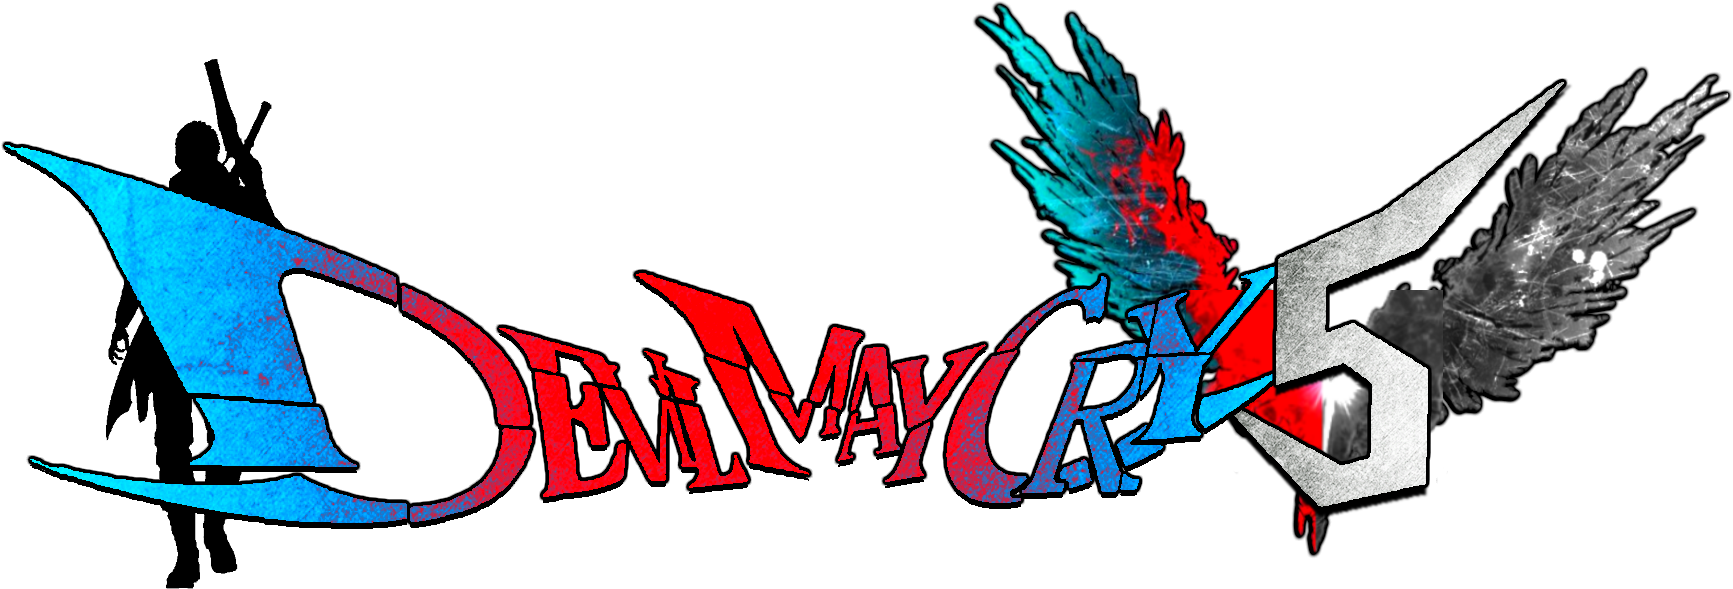 Devil May Cry Clipart - Devil May Cry Clipart (1920x1080)